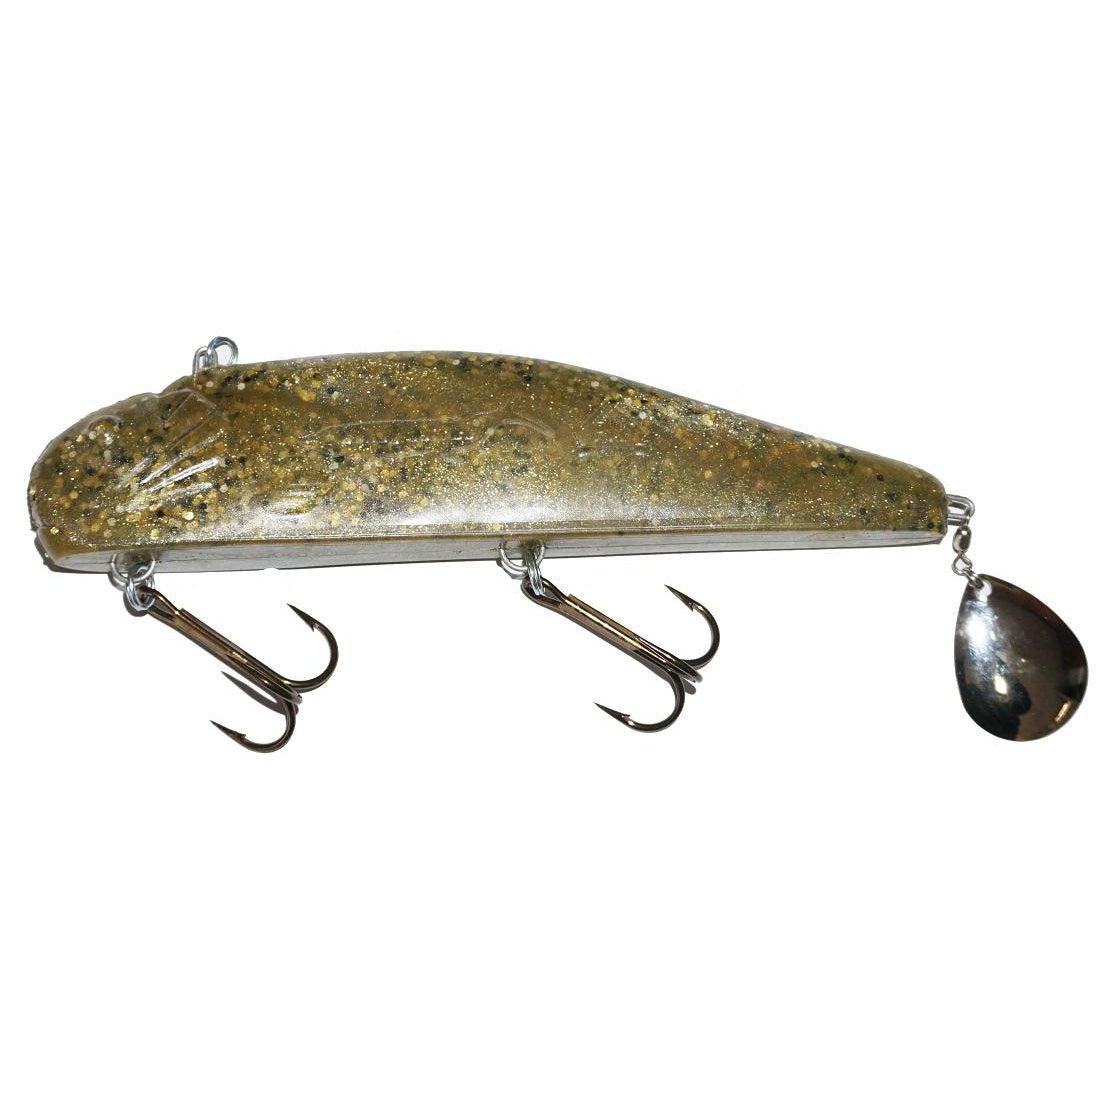 View of Jigs-Spoons Bondy Bait Co. Magnum Bondy Bait Jig Walleye available at EZOKO Pike and Musky Shop